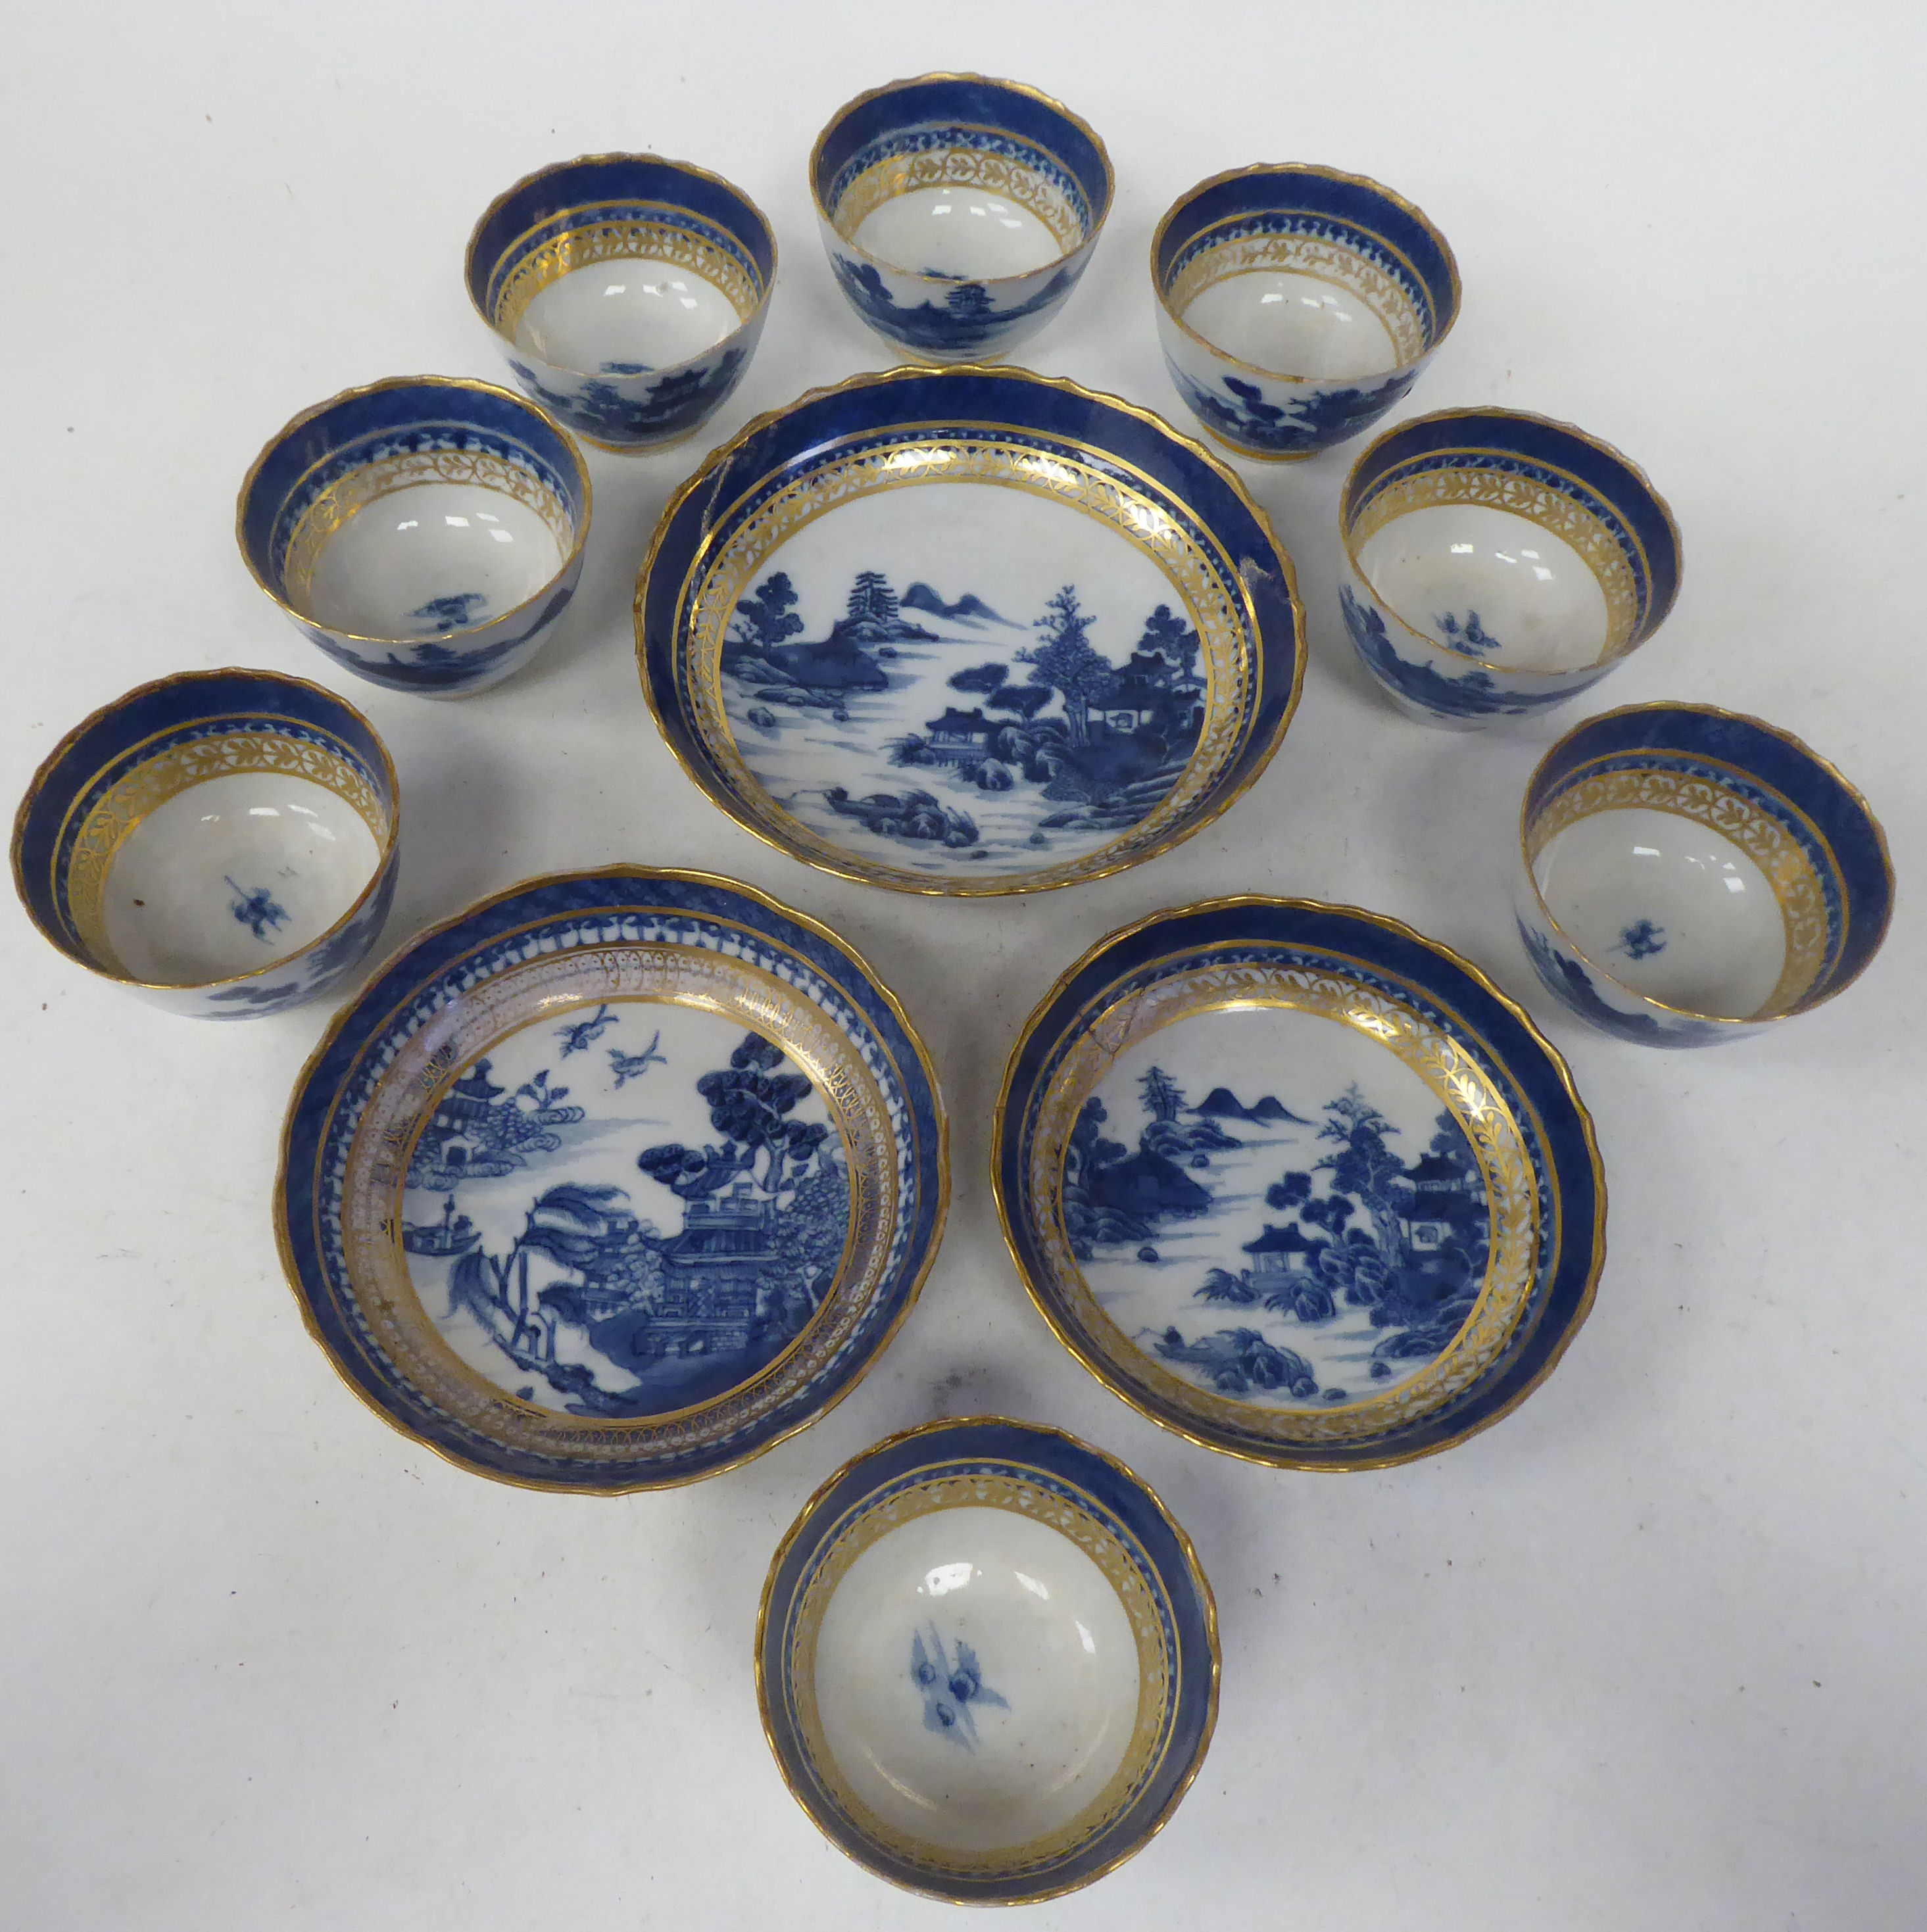 Late 18thC porcelain teaware, decorated in blue, white and gilding with Chinese seascapes, small - Image 2 of 4